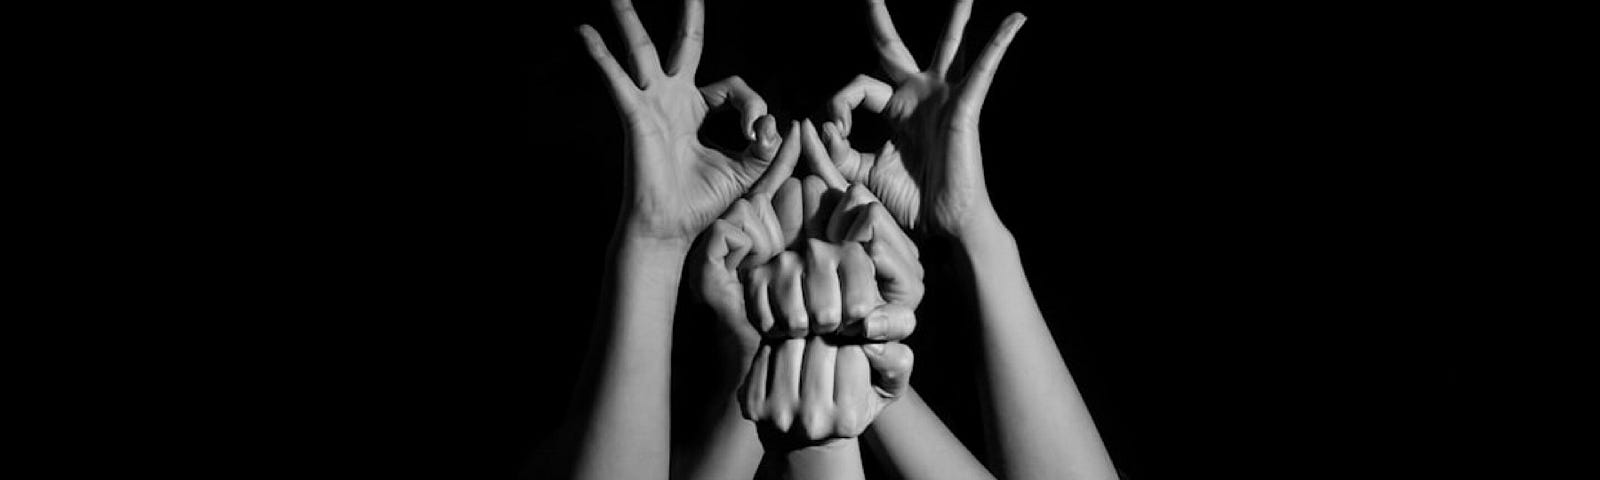 A group of hands reaching up in the air, forming different shapes with the fingers. A black and white photo